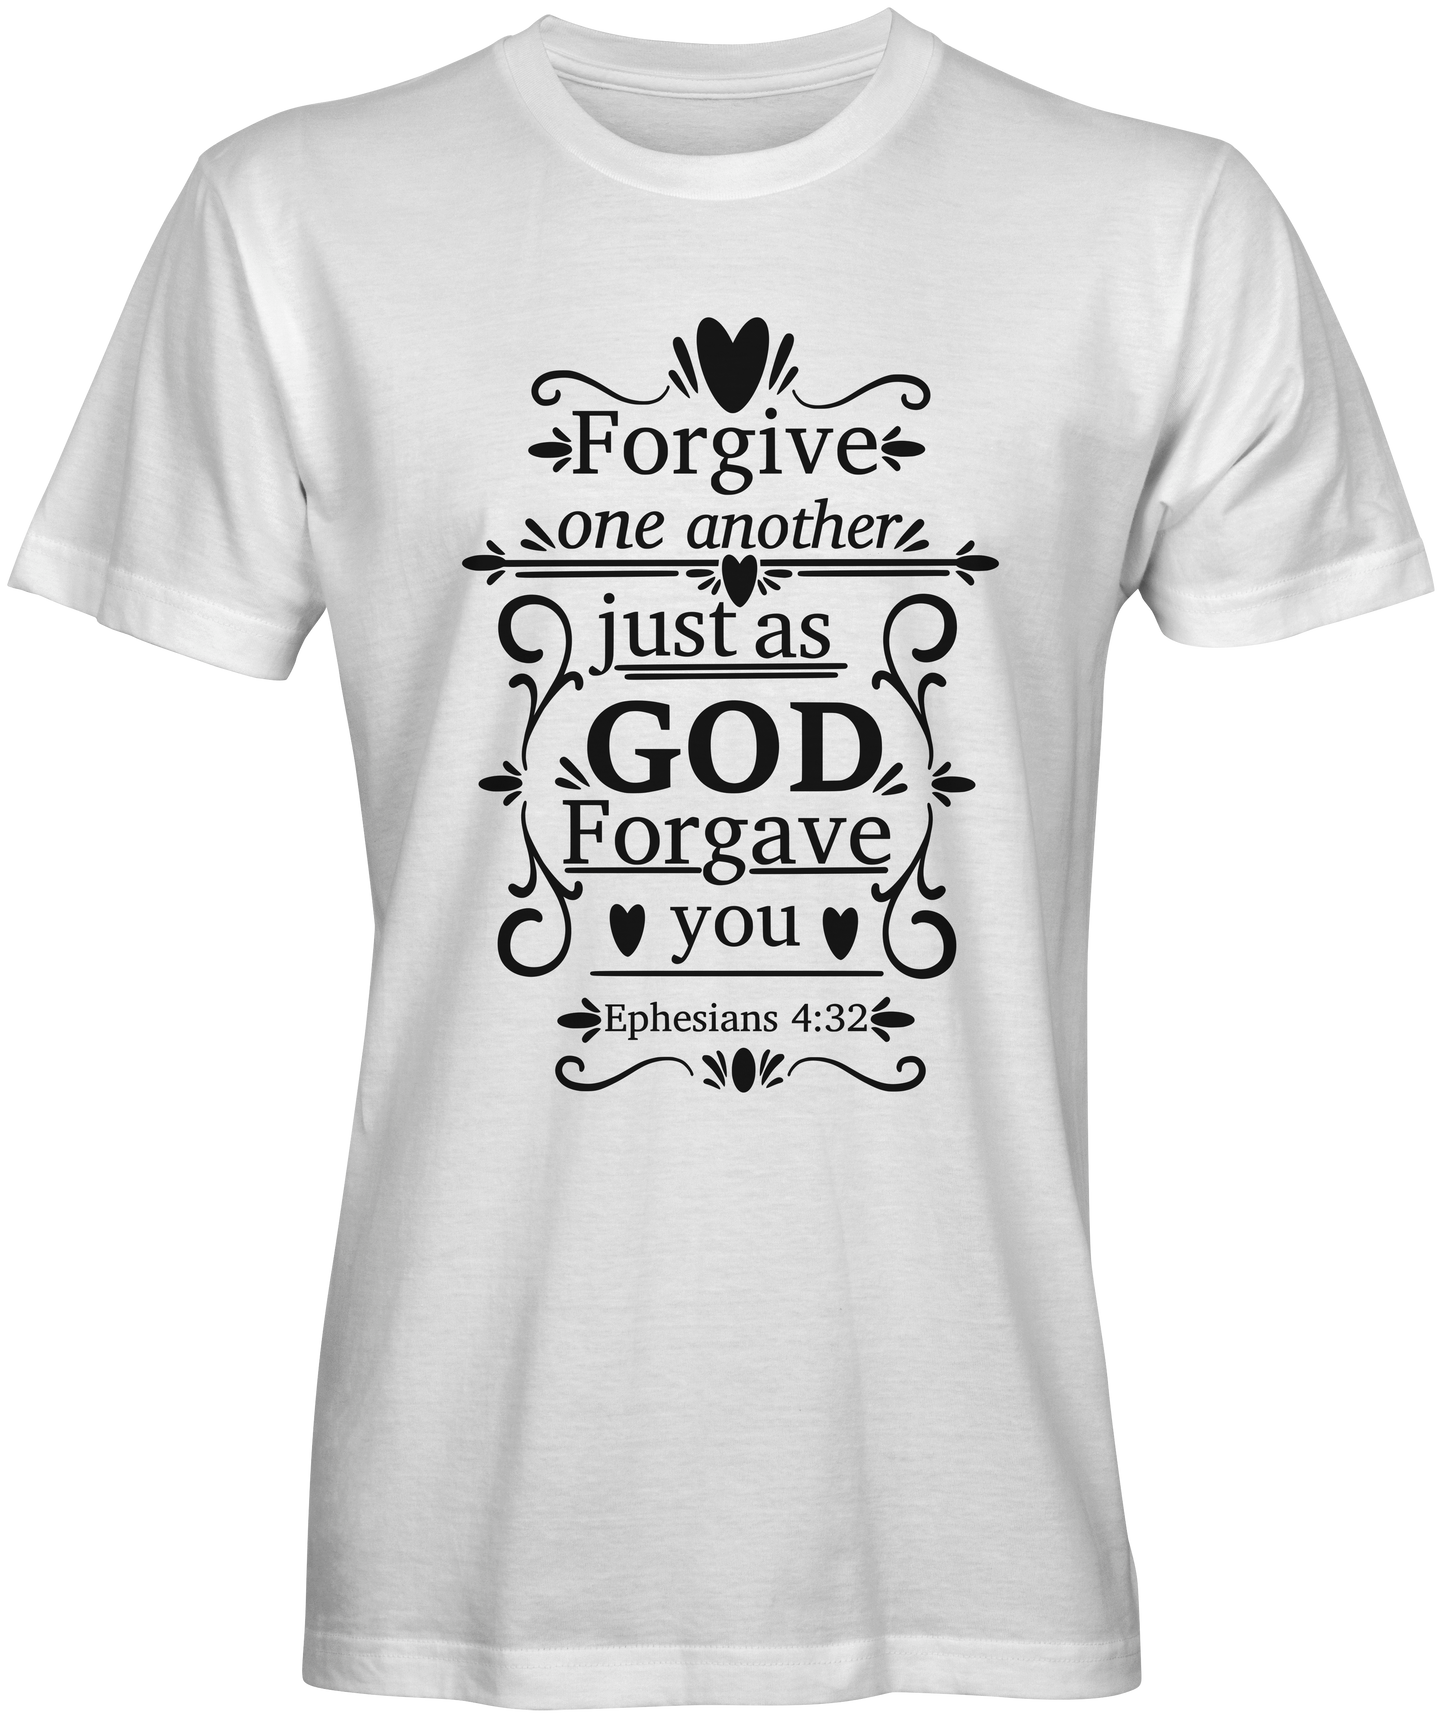 The Book of Ephesians Bible Verse T-shirts.